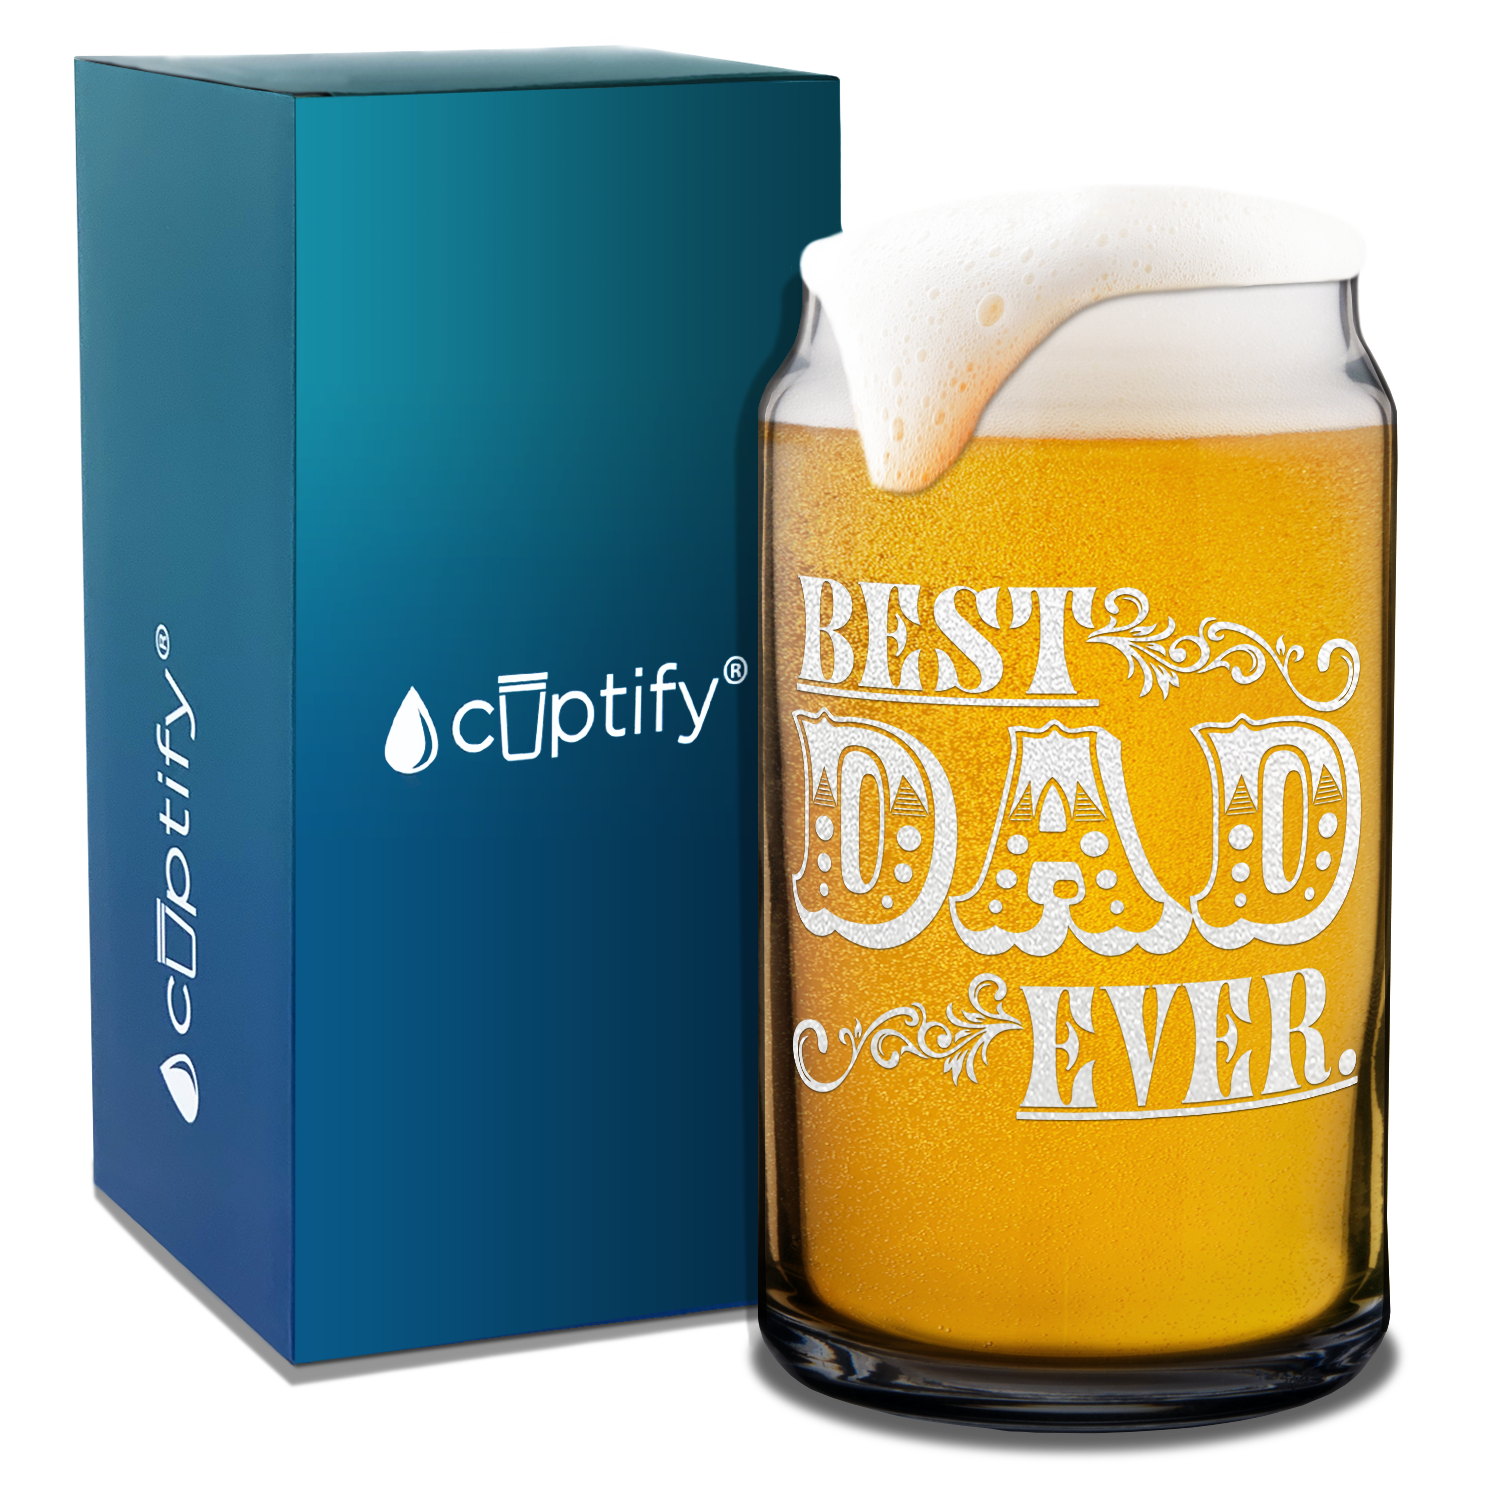  Best Dad Ever Design Etched on 16 oz Beer Glass Can